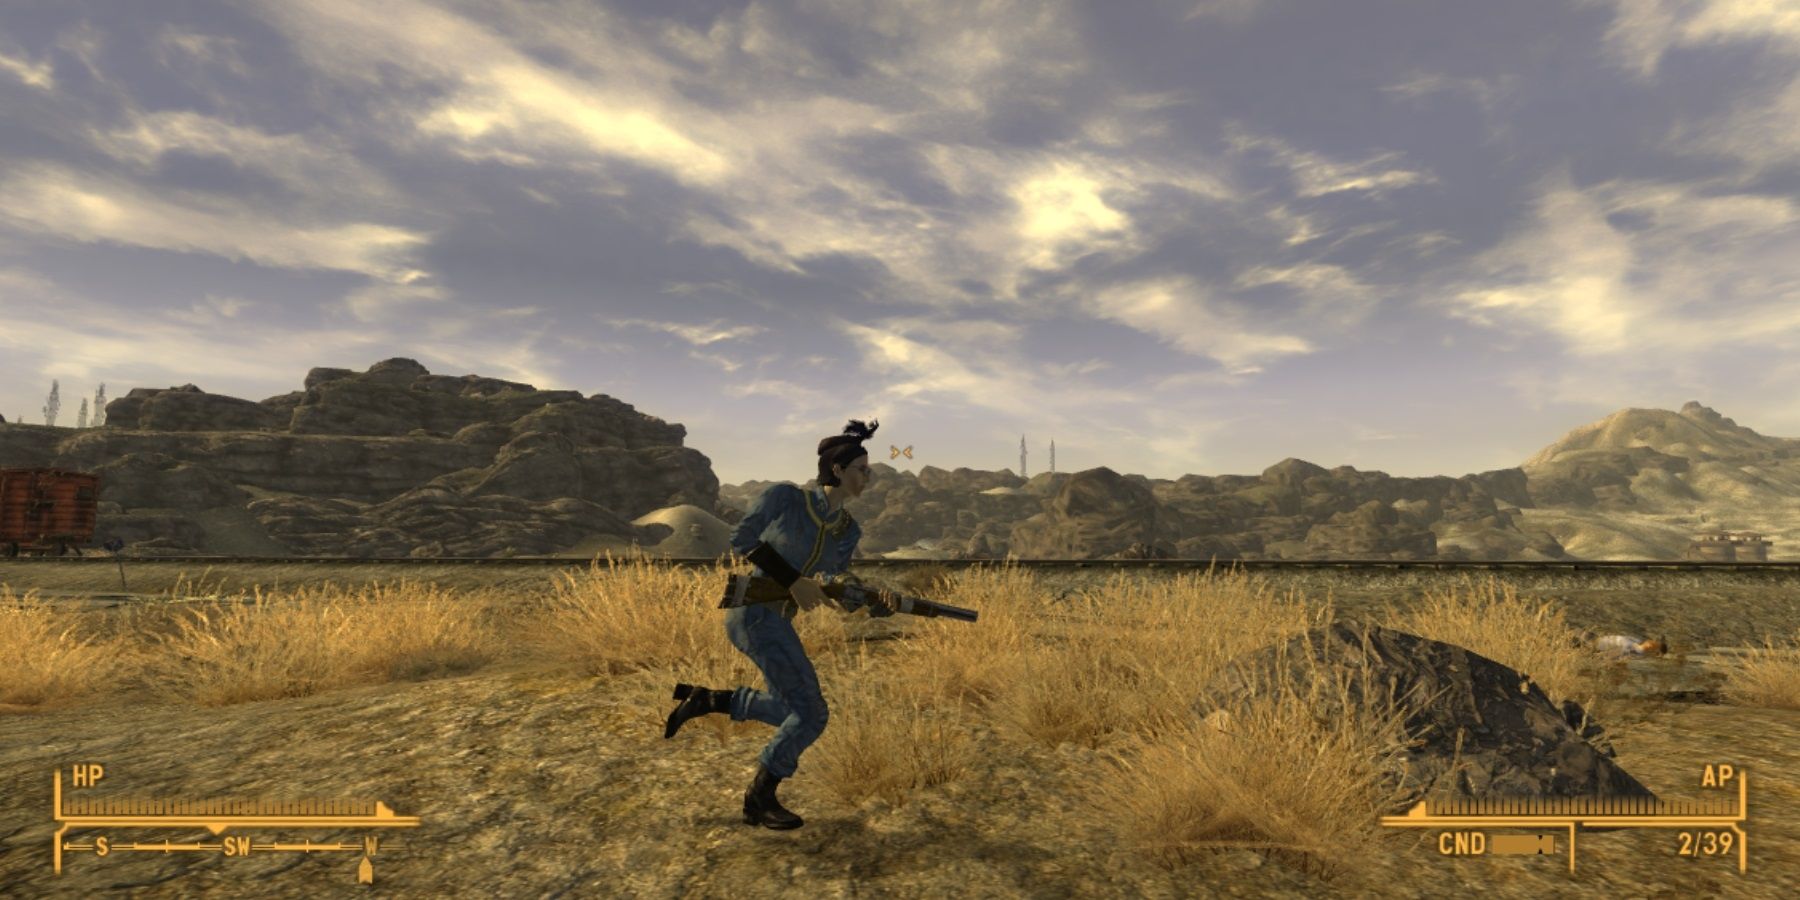 Running in Fallout New Vegas